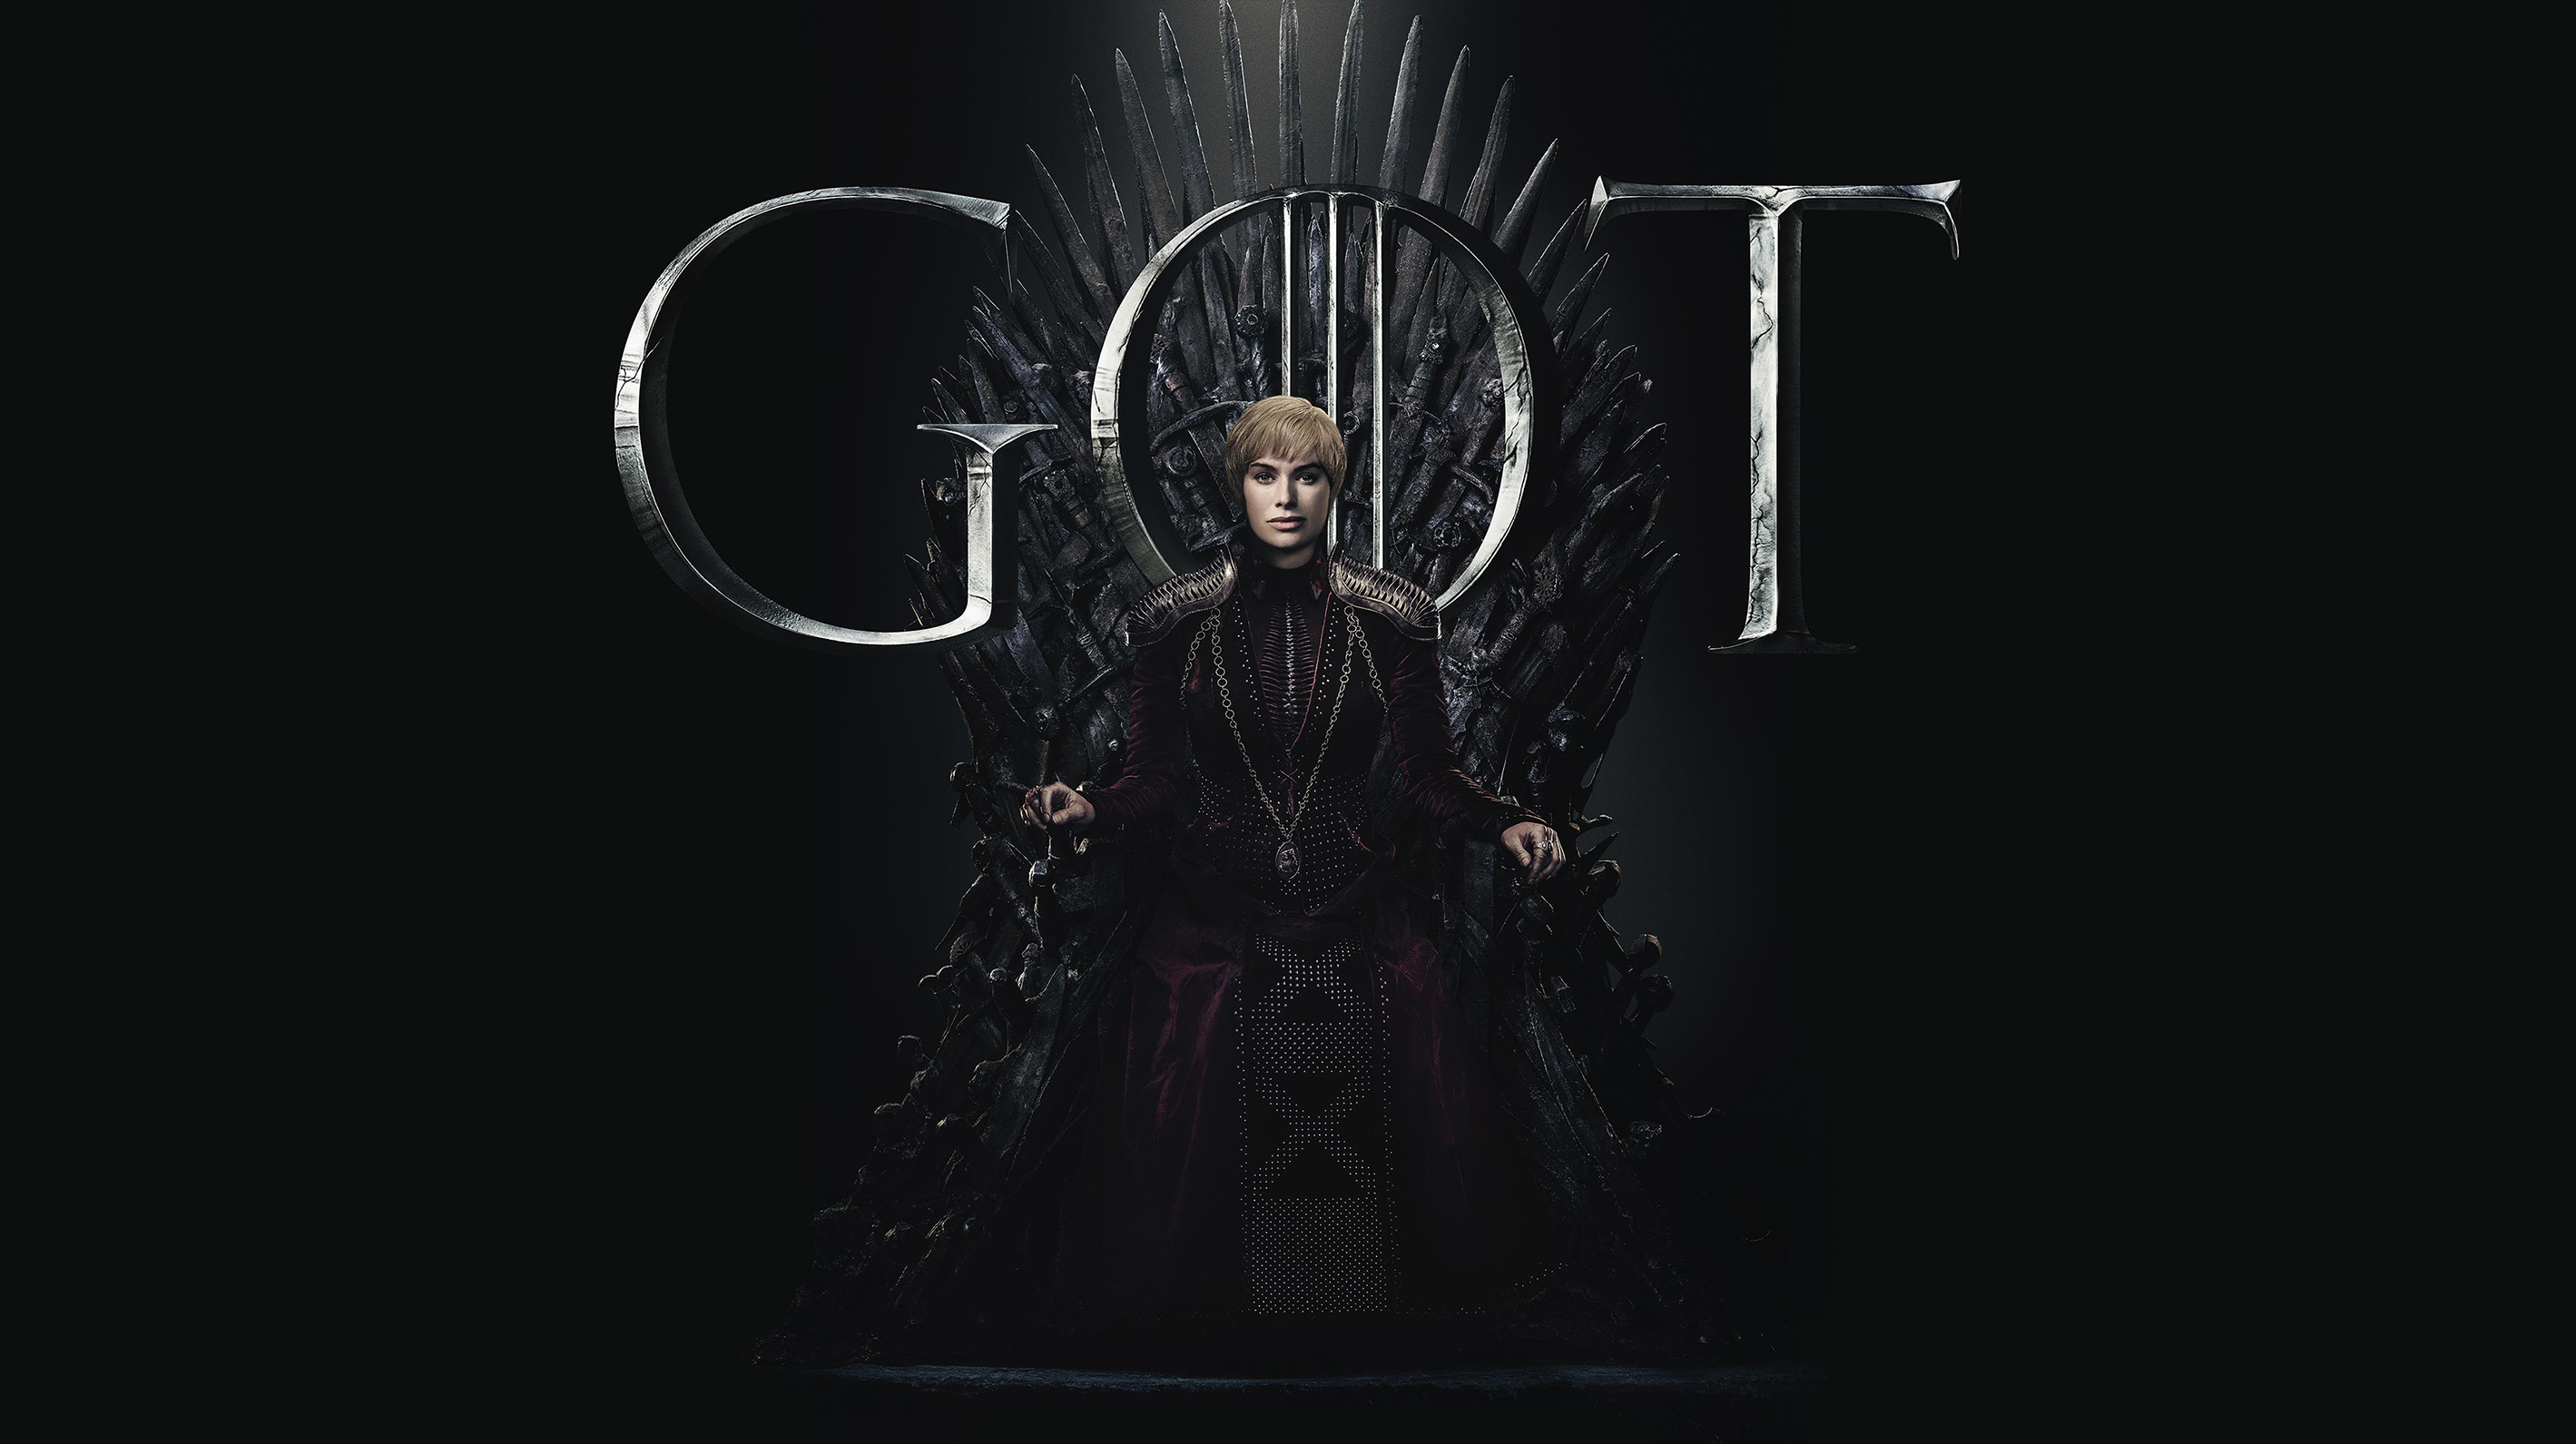 1920x10802021290 Cersei Lannister Game Of Thrones Season 8 Poster  1920x10802021290 Resolution Wallpaper, HD TV Series 4K Wallpapers, Images,  Photos and Background - Wallpapers Den